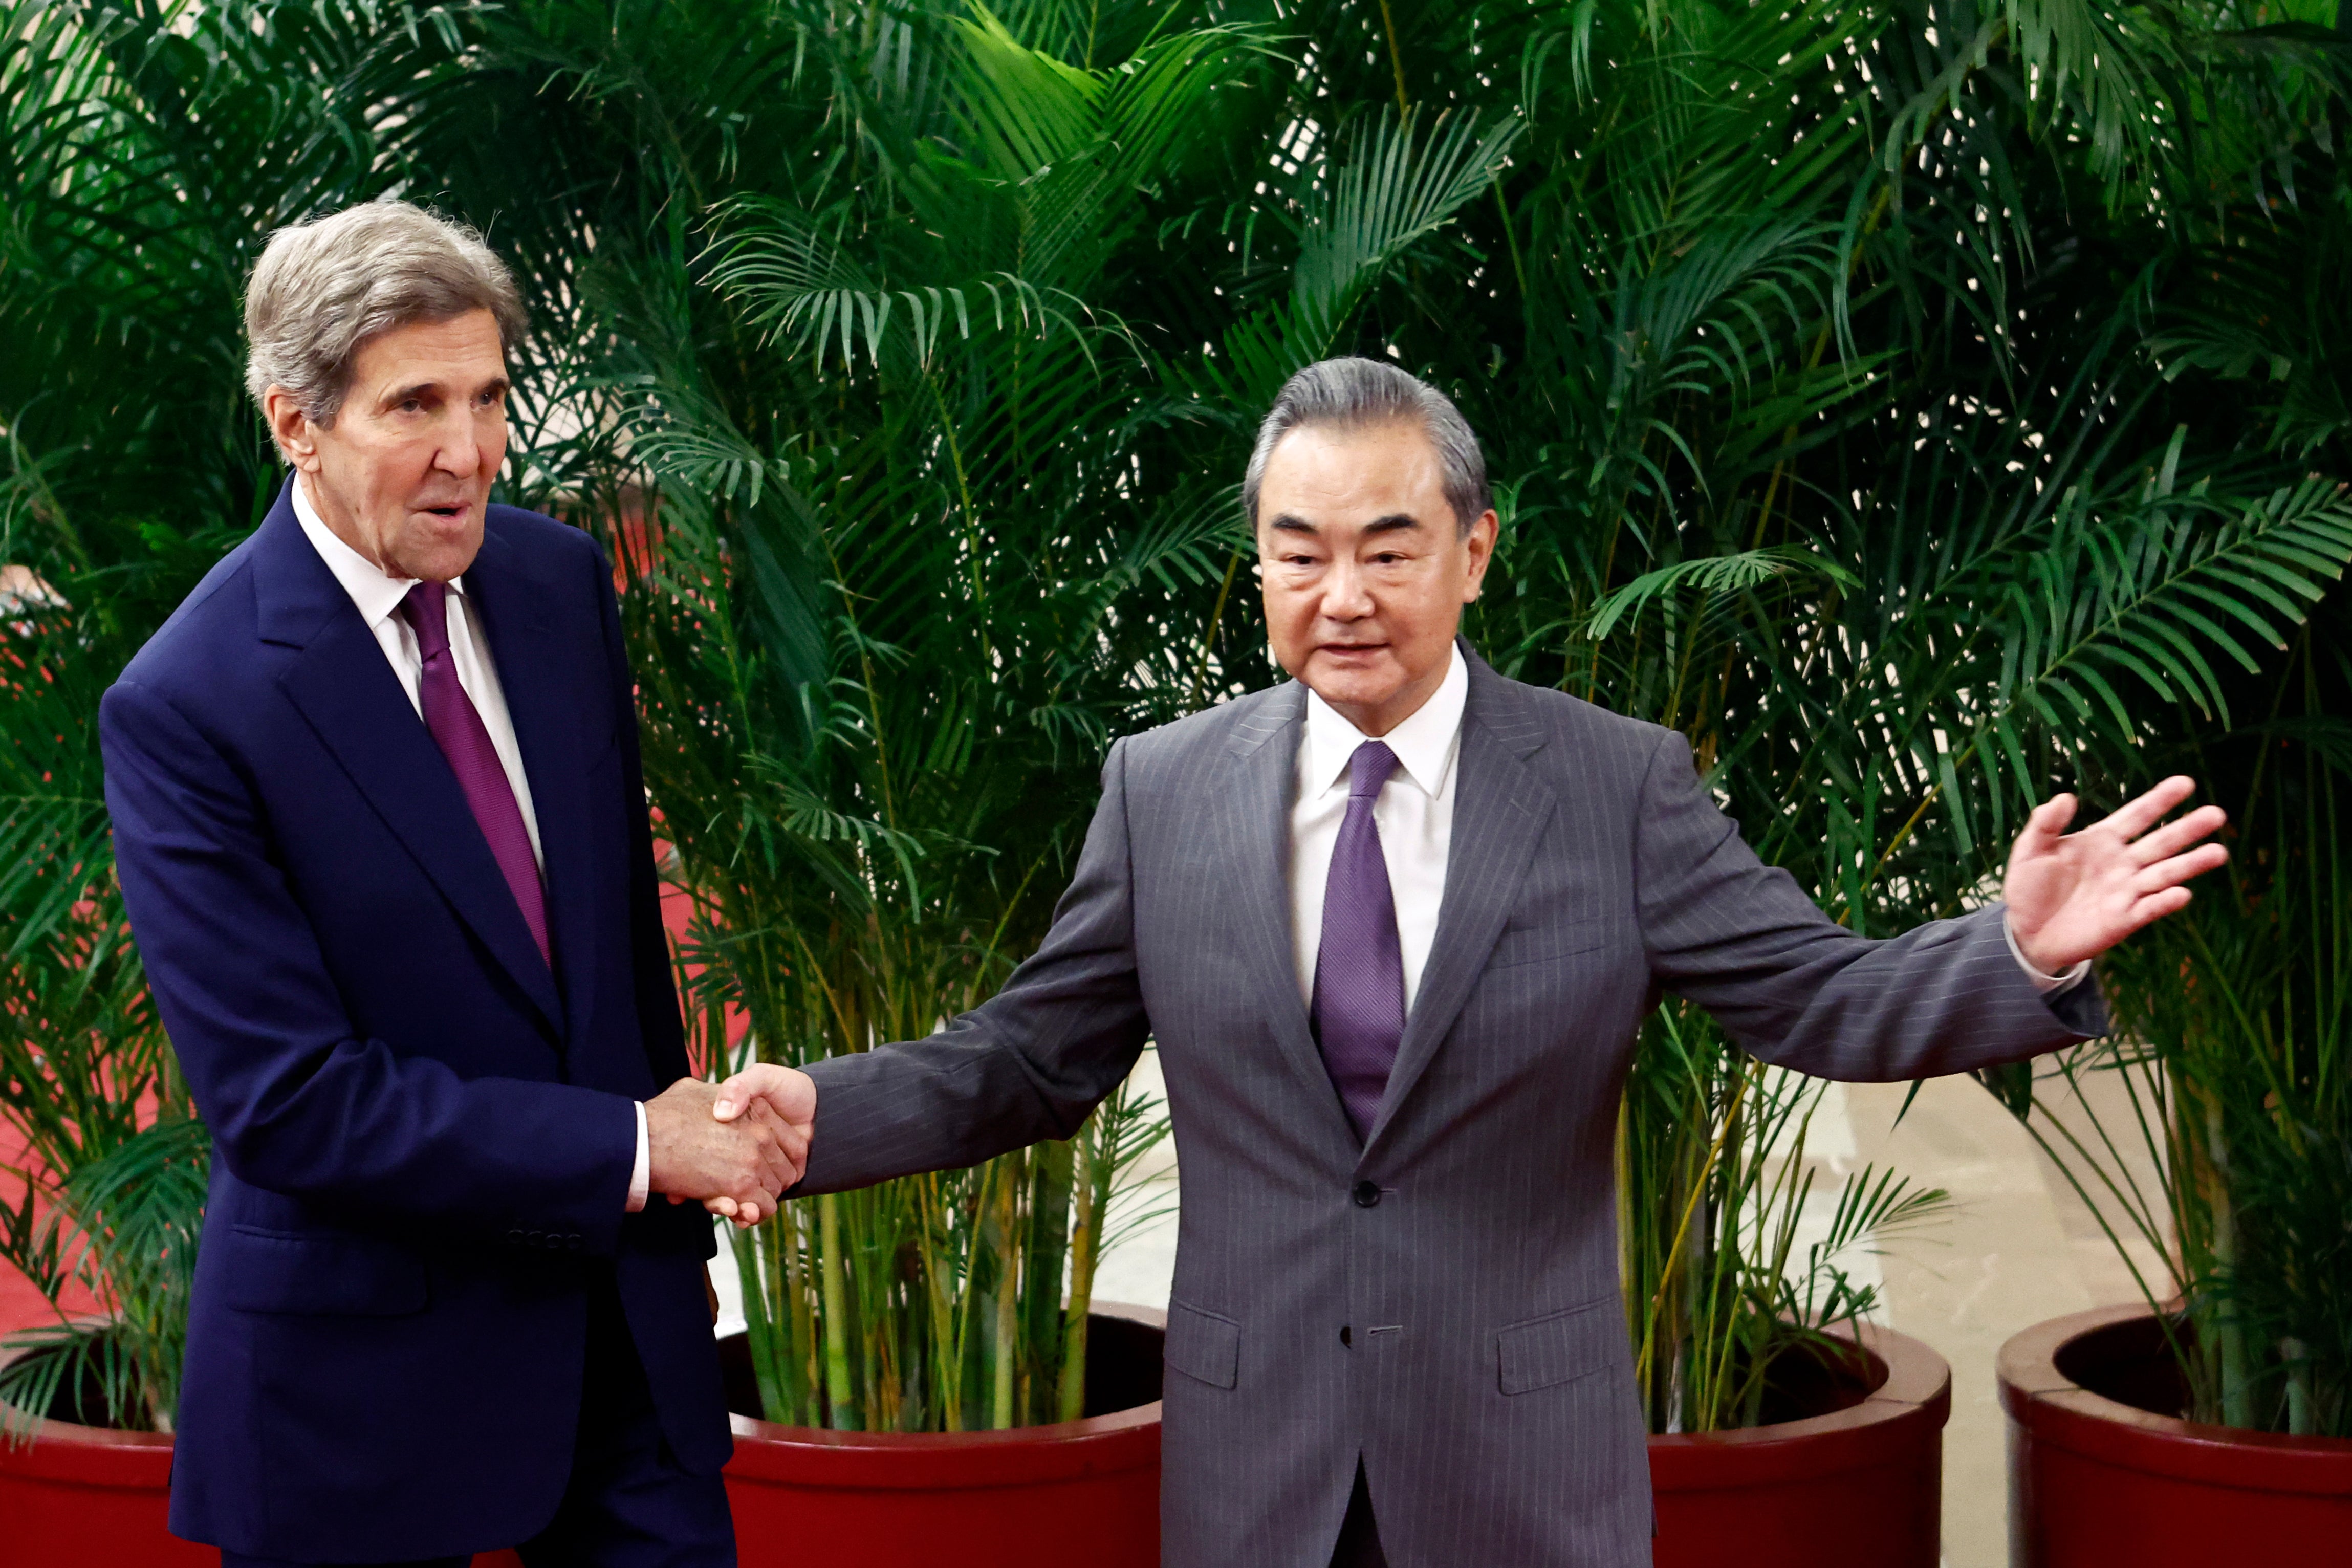 US climate envoy John Kerry (L) is greeted by top Chinese diplomat Wang Yi